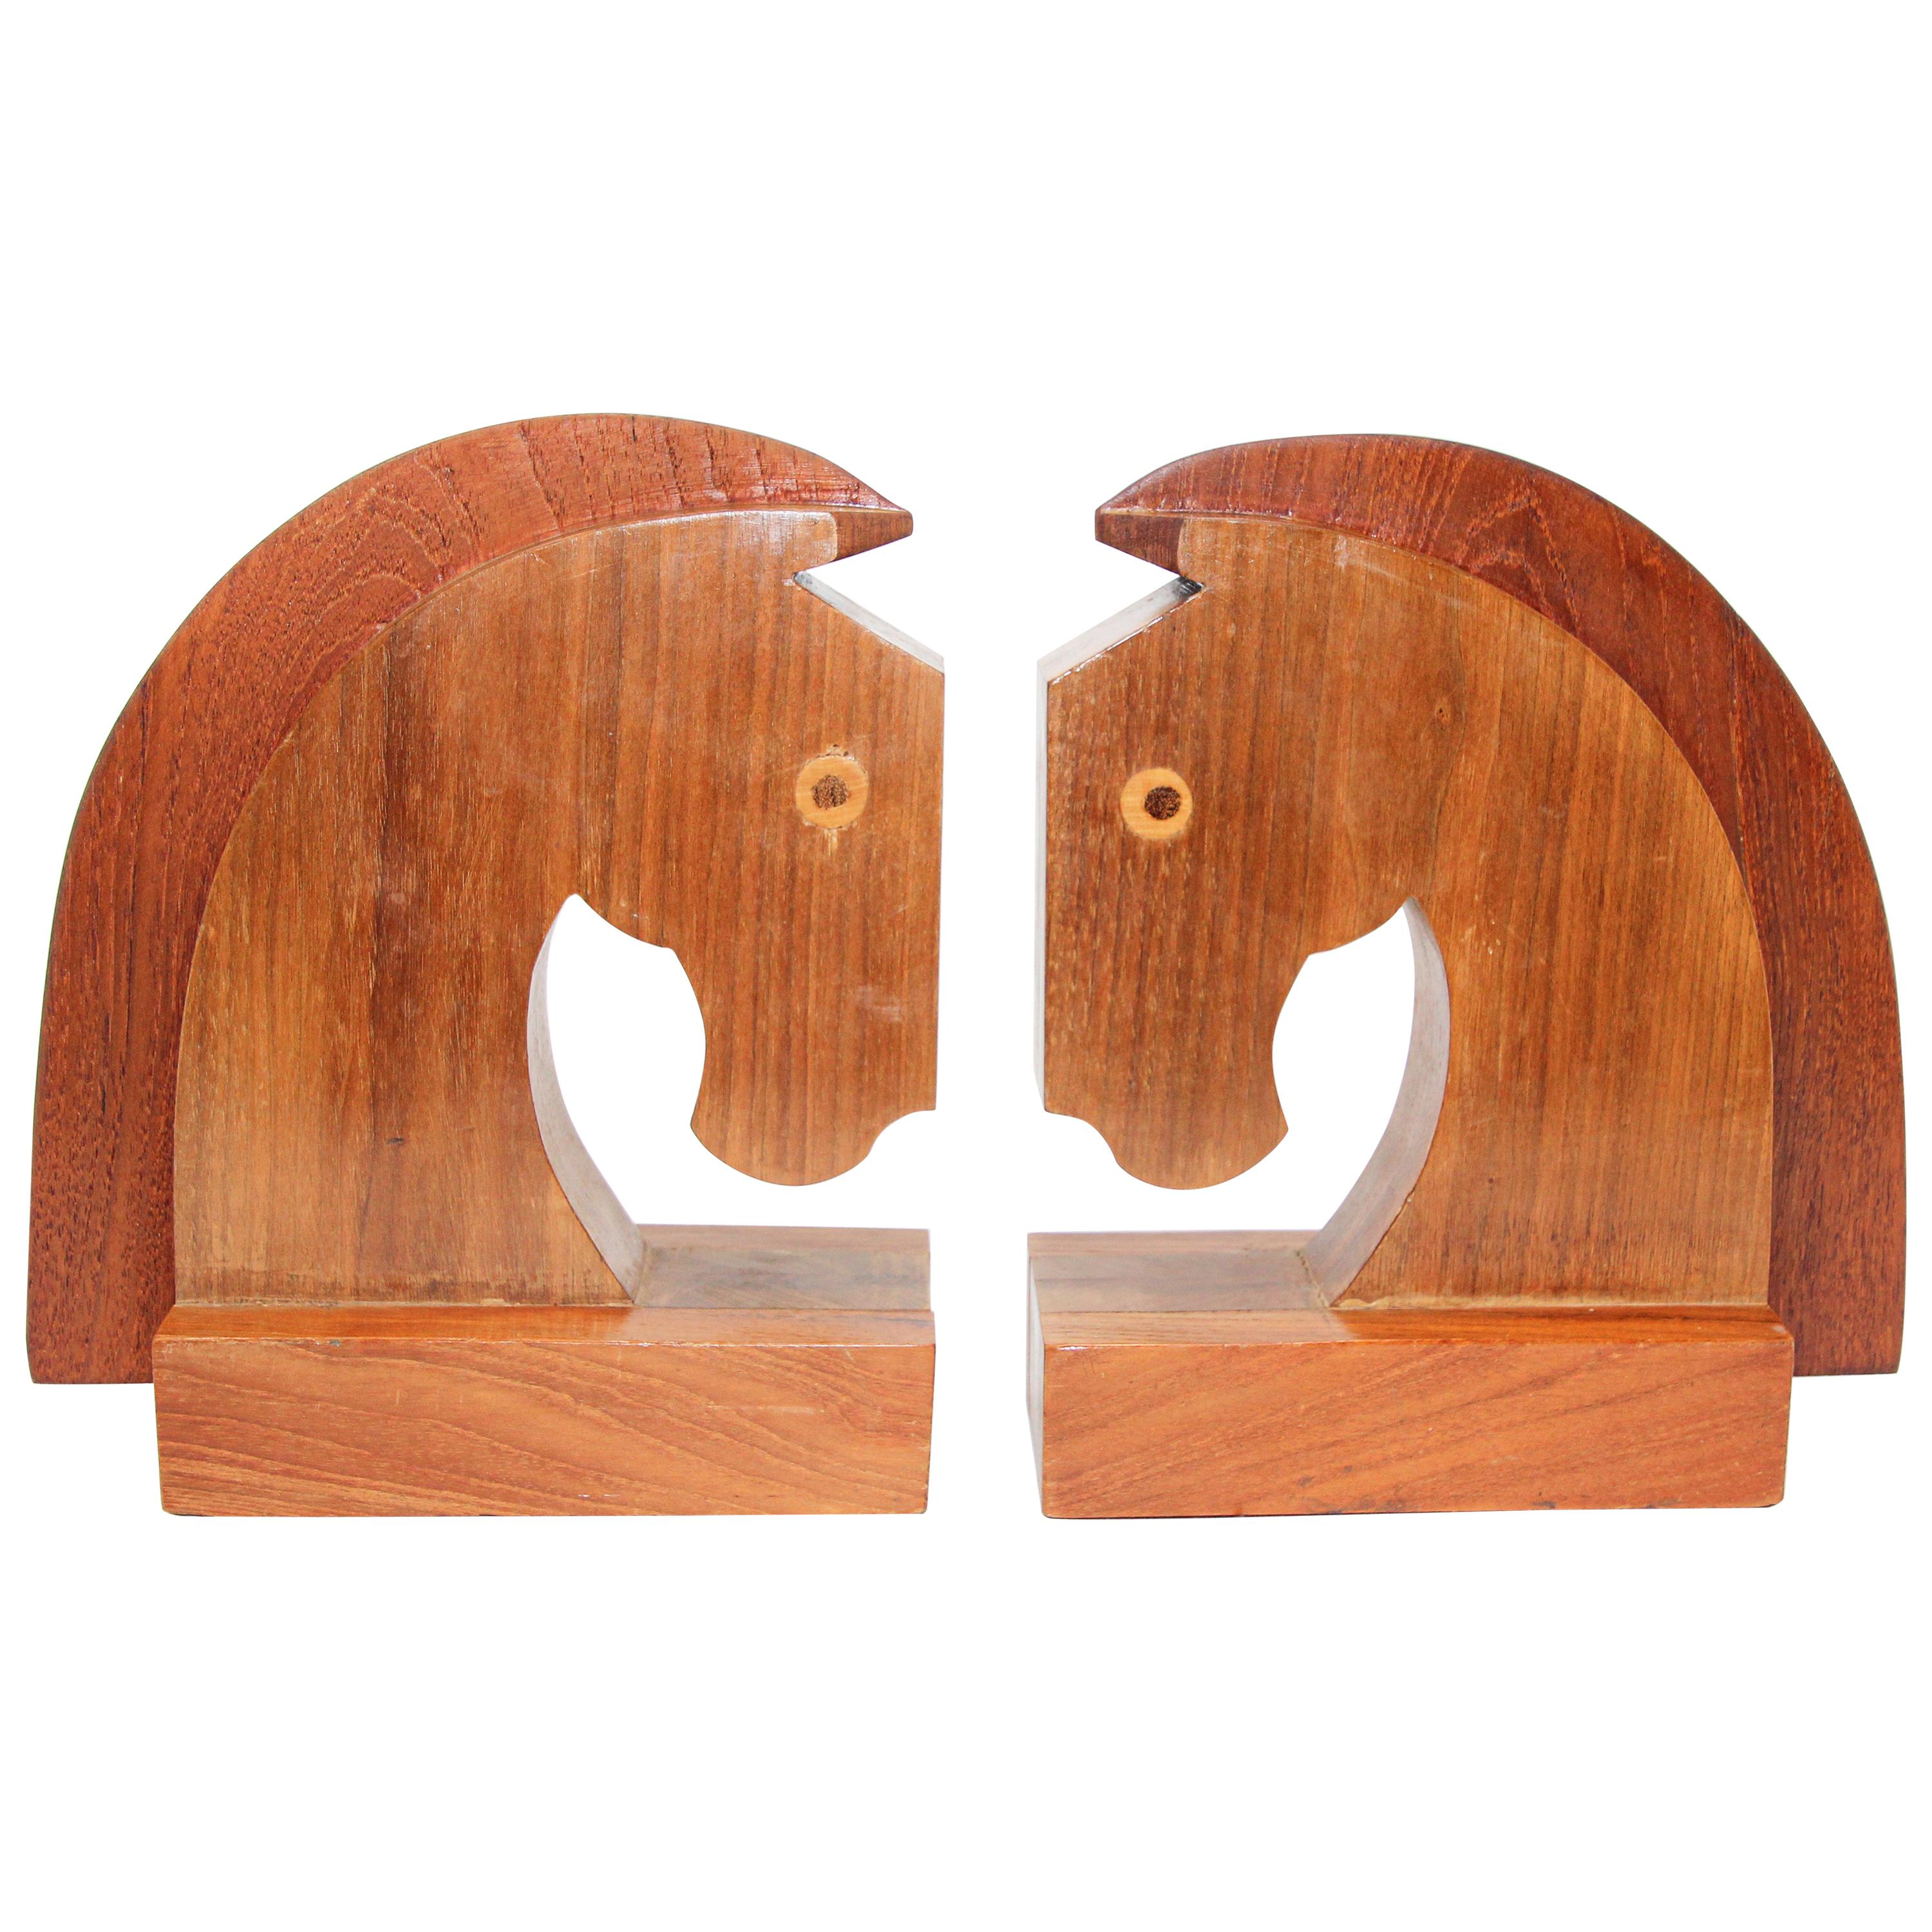 Art Deco Stylized Wood Sculptures of Horse Bust Bookends